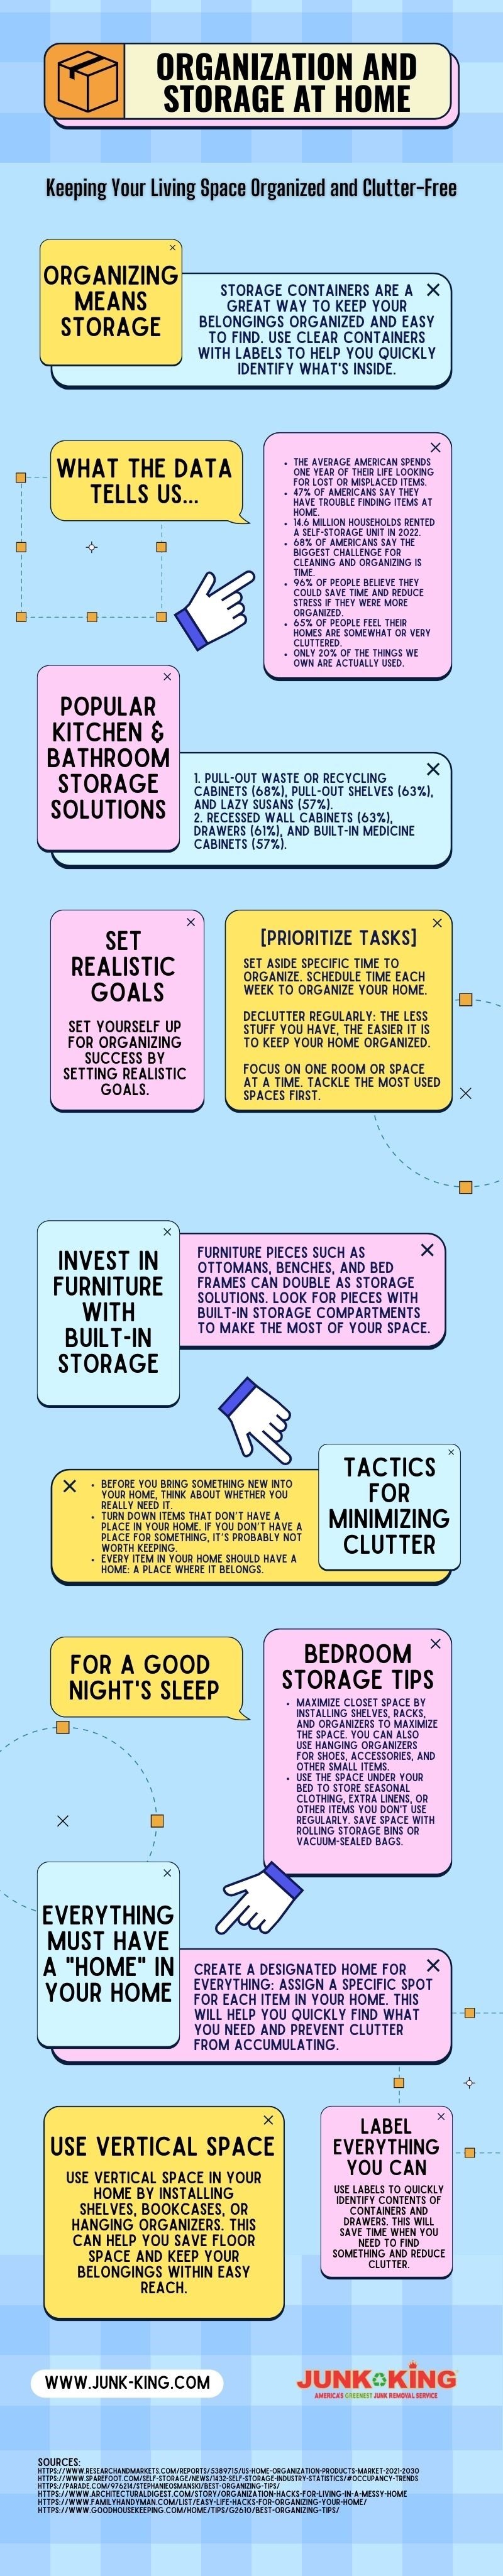 organization and storage at home infographic